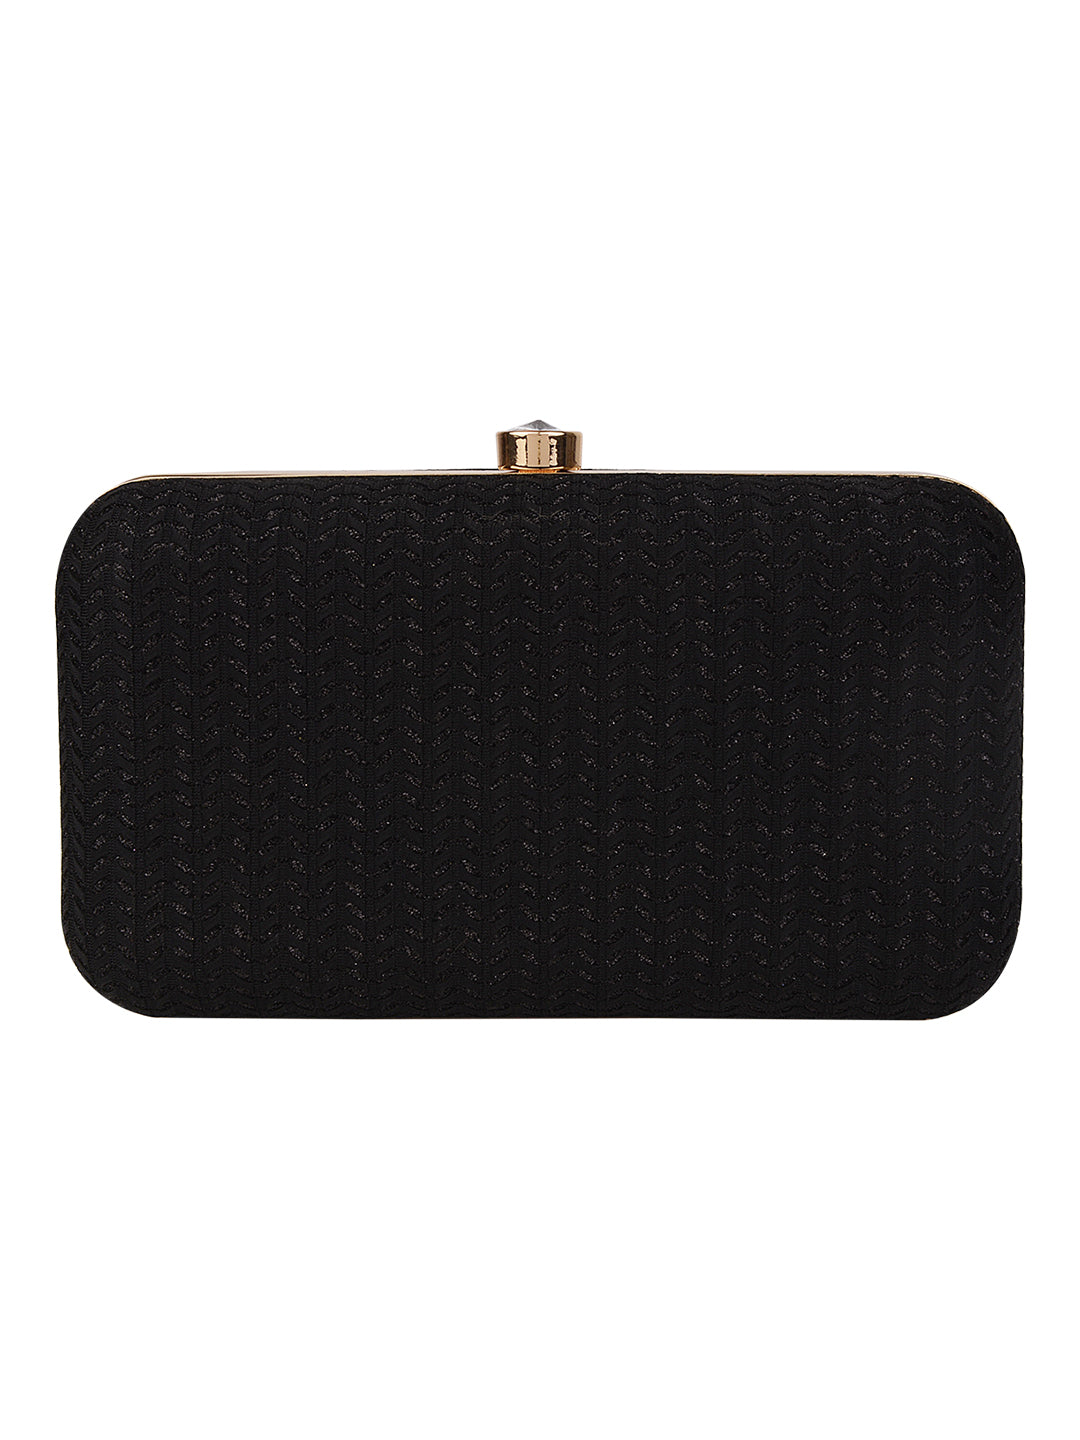 Designed for versatility, this clutch effortlessly transitions from daytime to evening affairs. 